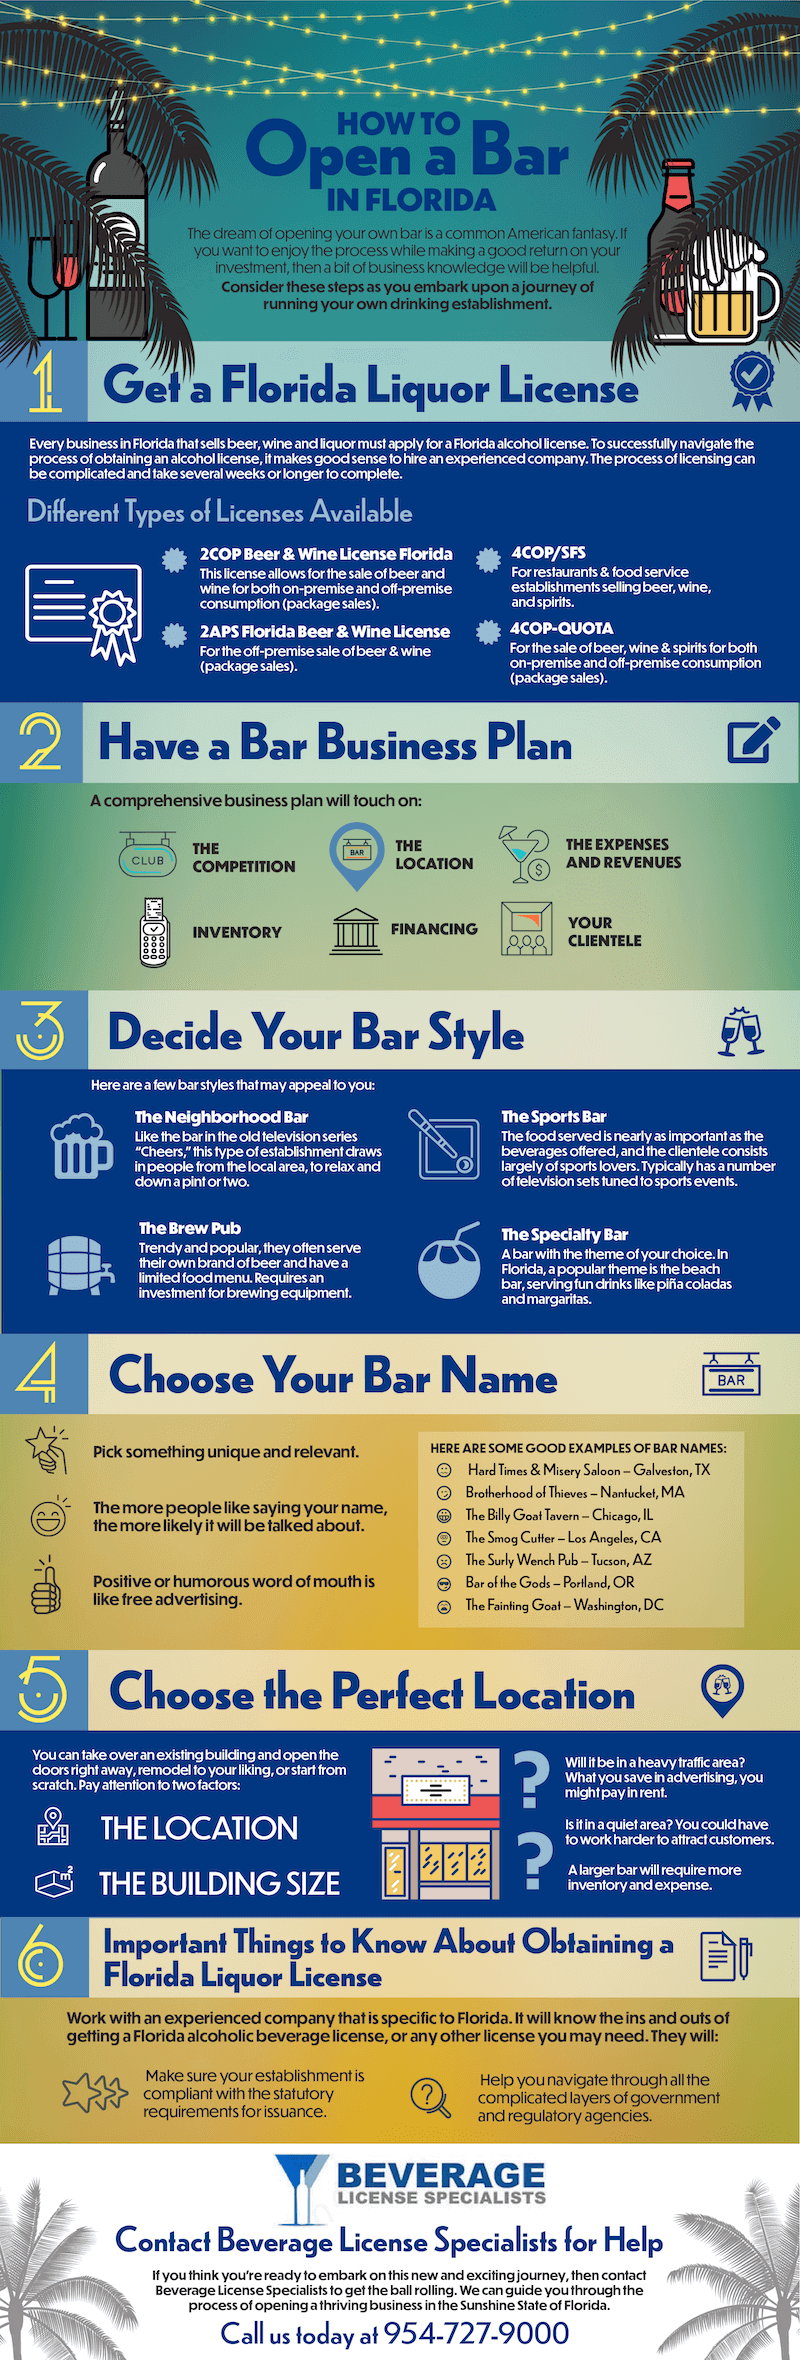 How to Open a Bar in Florida - Beverage License Specialists